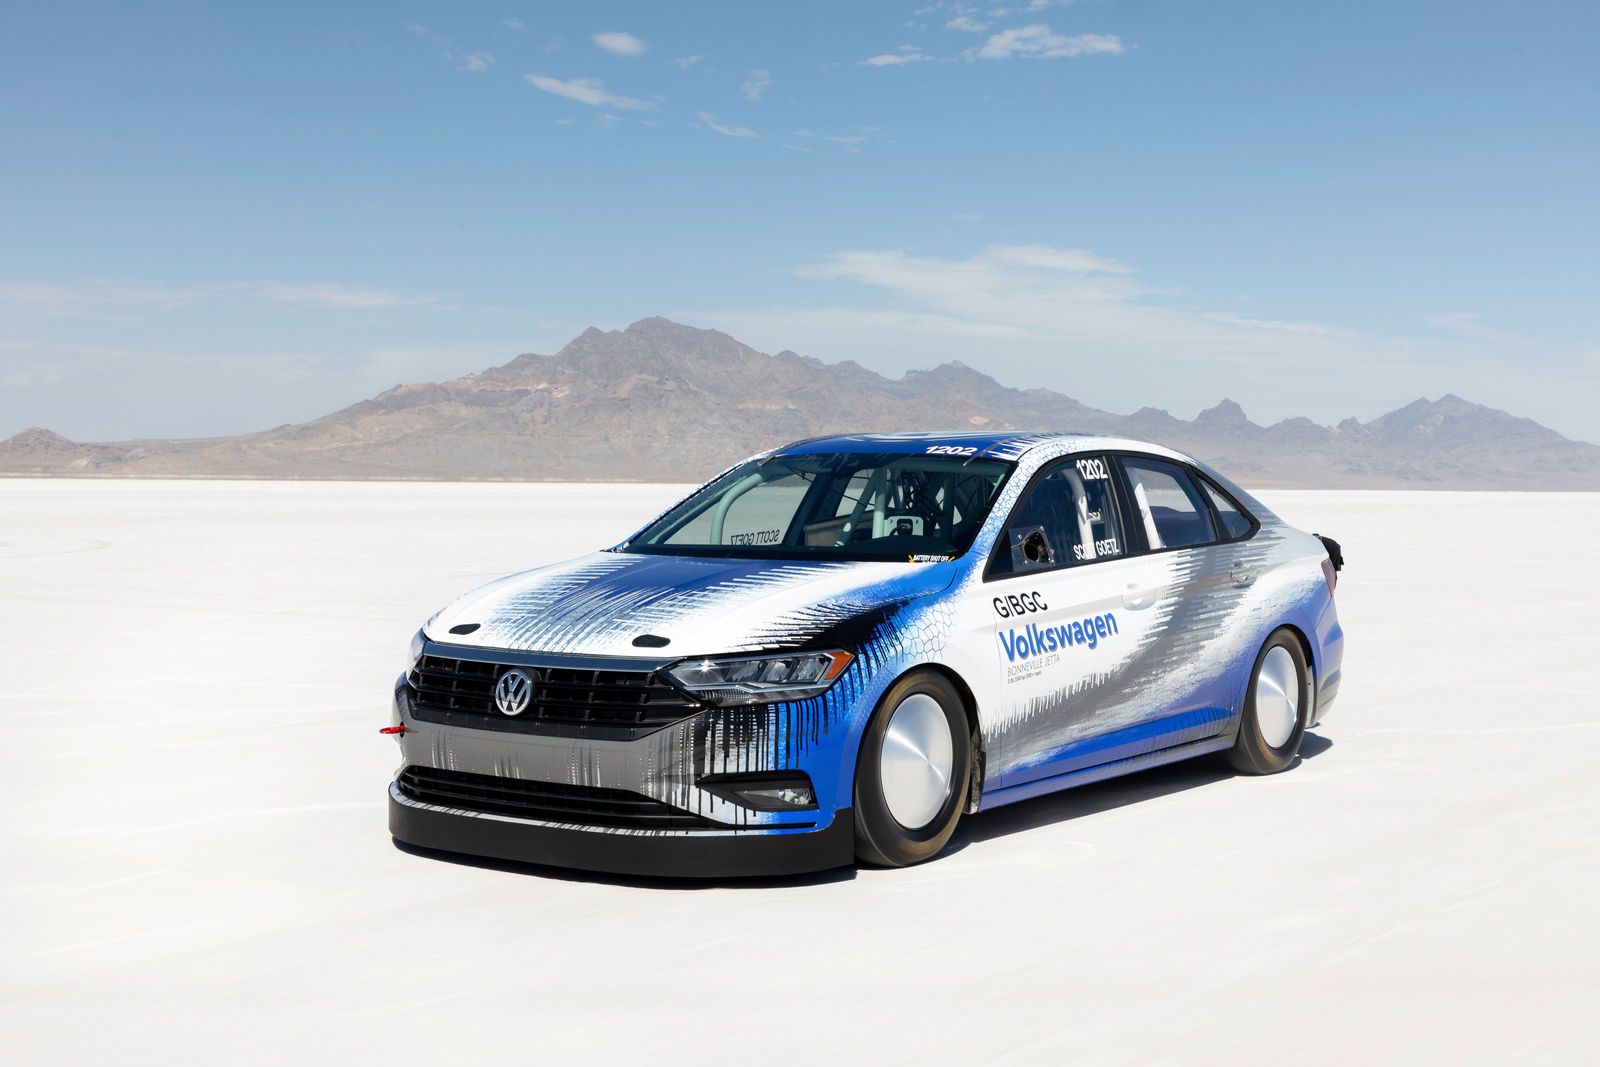 Modified Jetta breaks the speed record in its class in the USA with 338 km/h